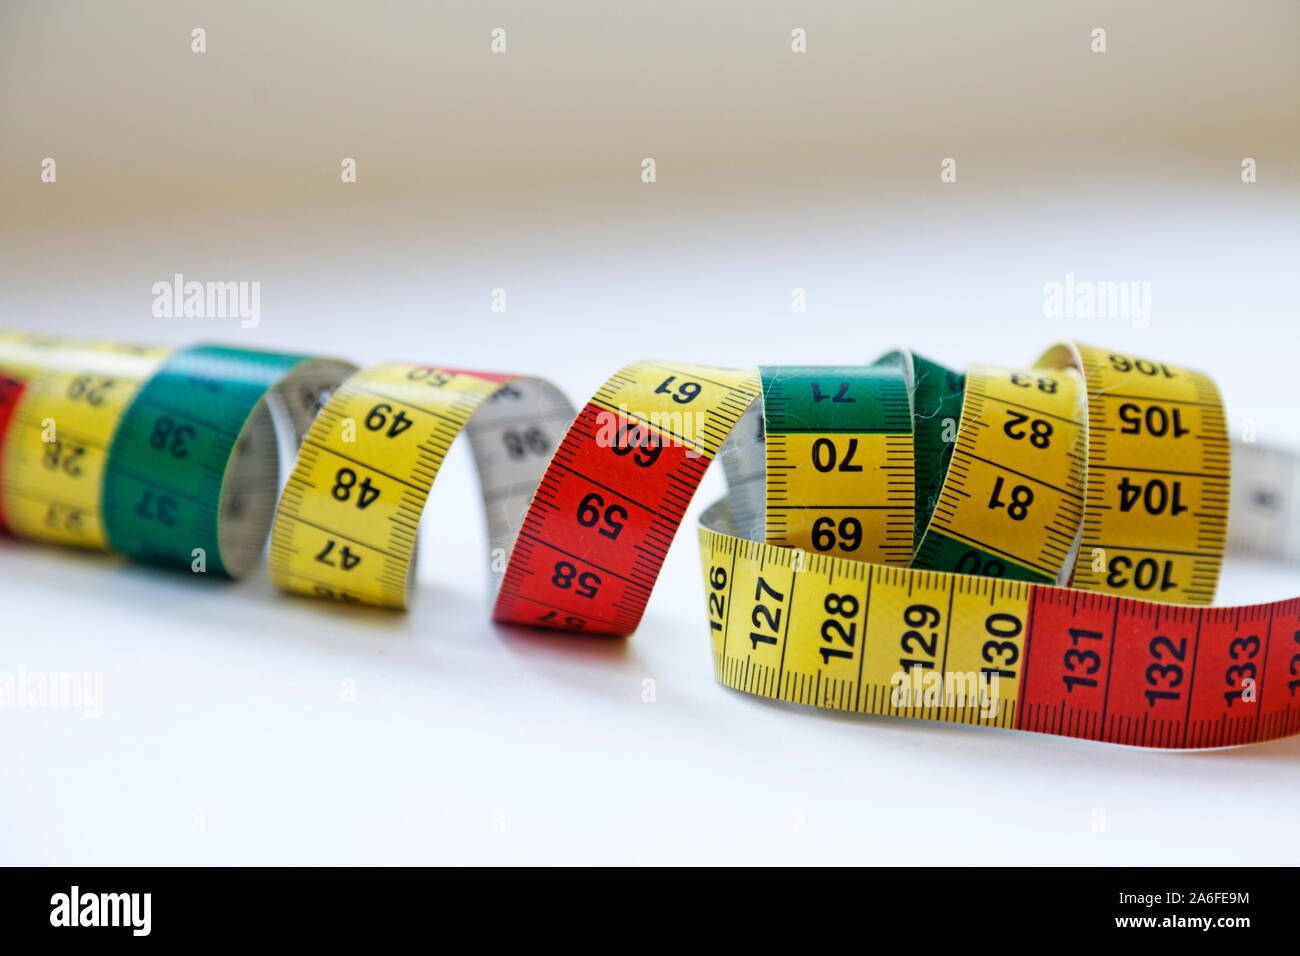 a tape measure in different colors that you use when sewing